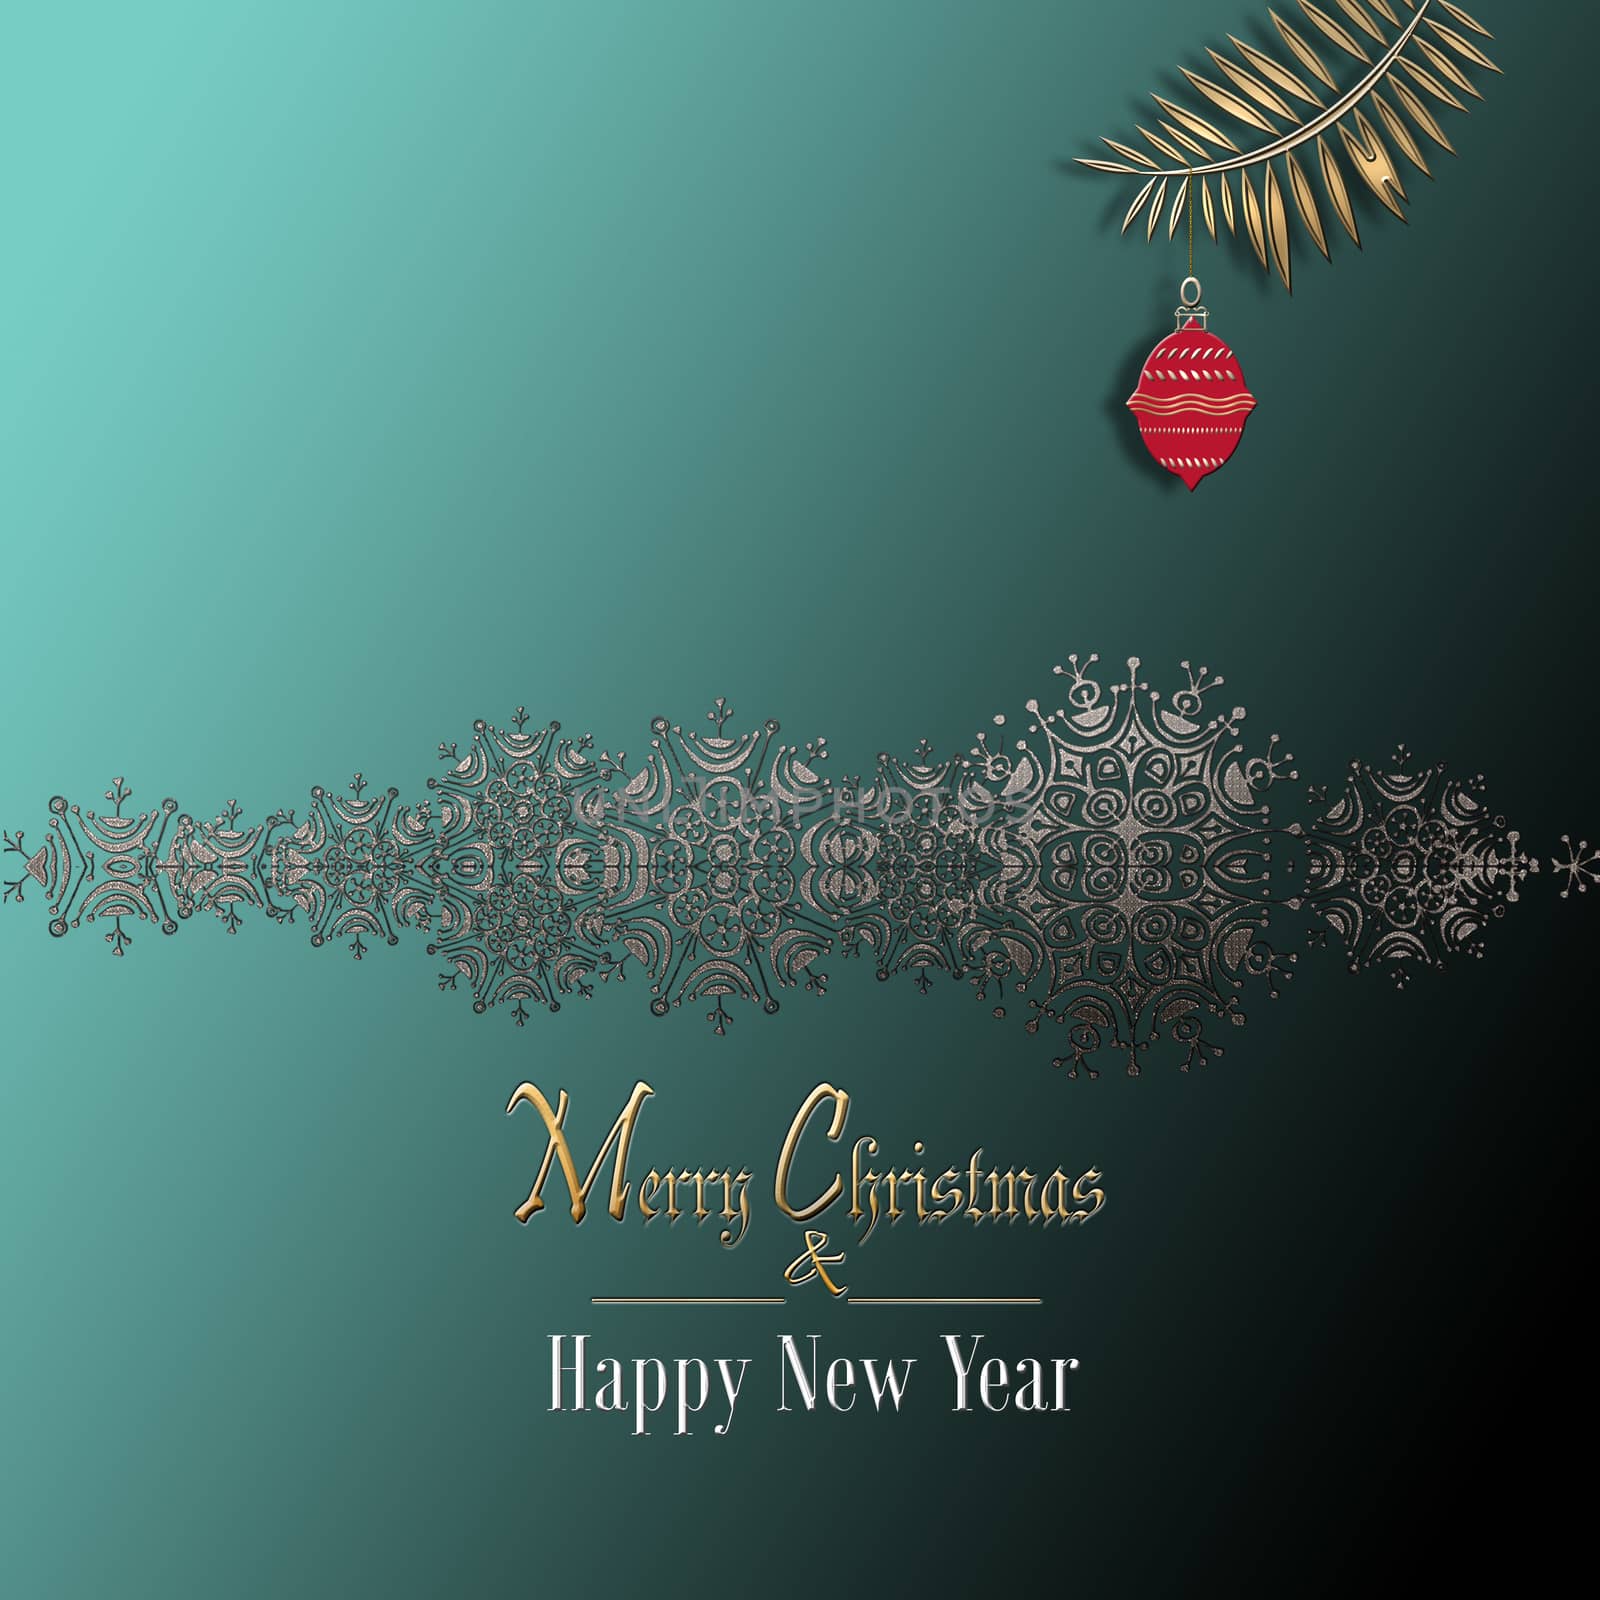 Christmas and Happy New Year Background with shiny border of snowflakes, red ball on green background. 3D illustration